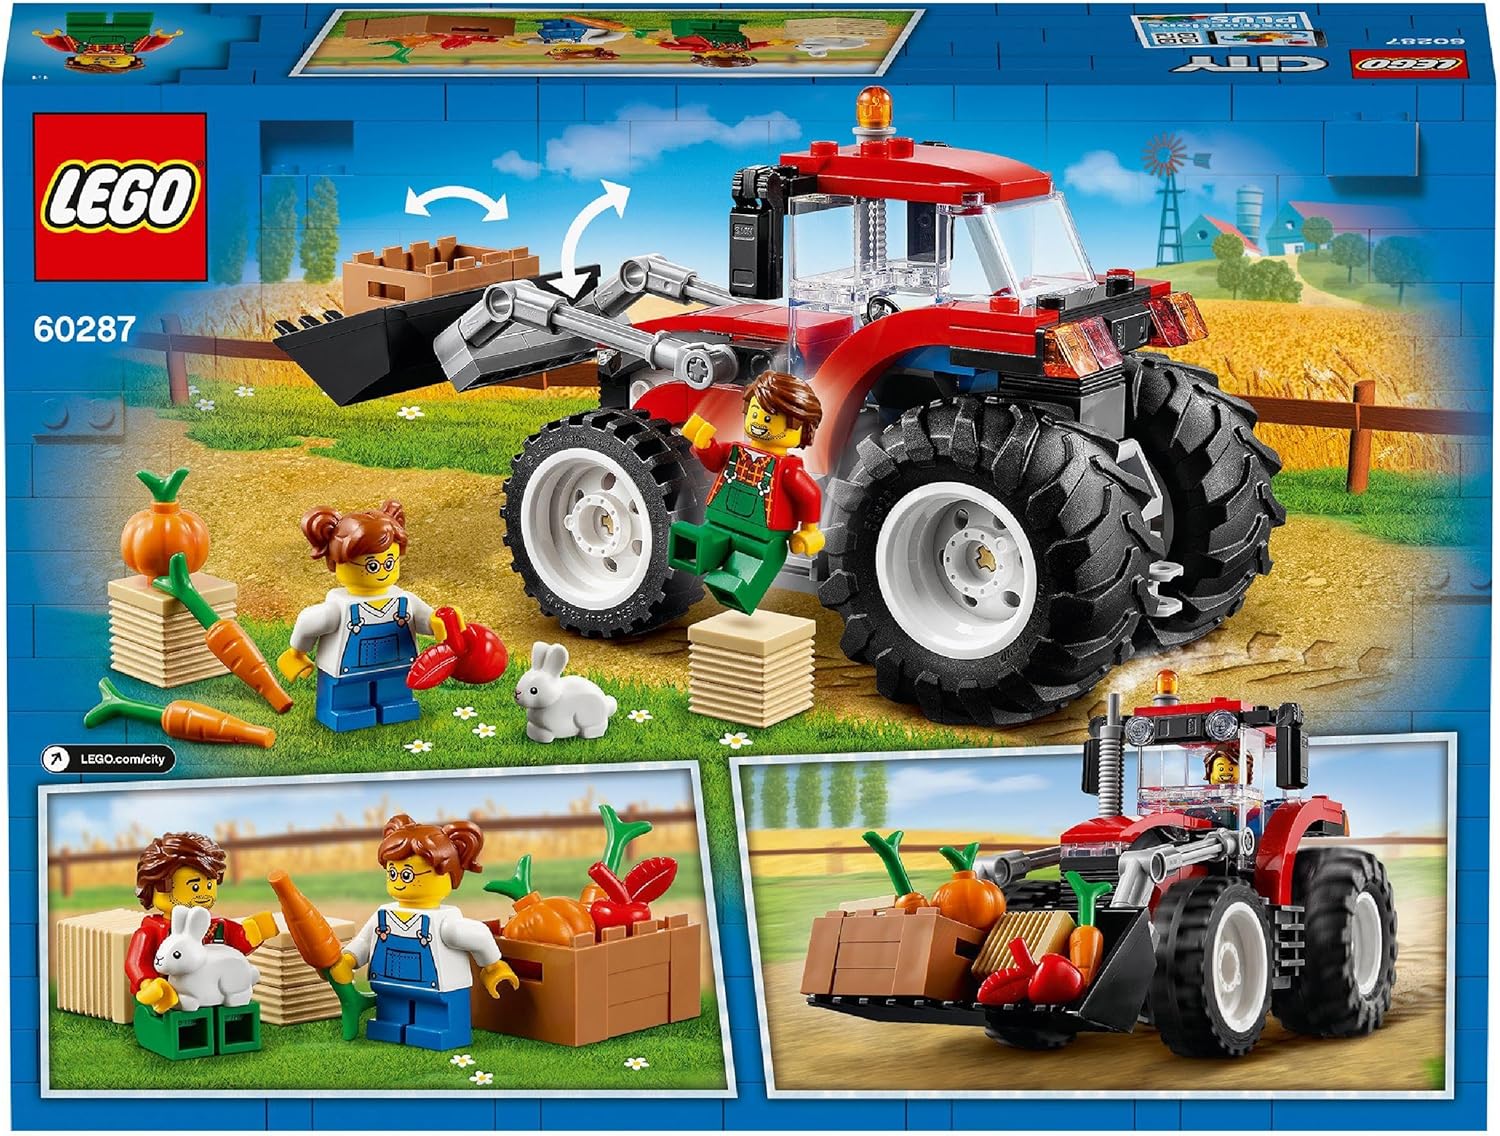 Lego 60287 City Tractor Toy Farm Set with Rabbit Figure for 5 Years Old Boys and Girls